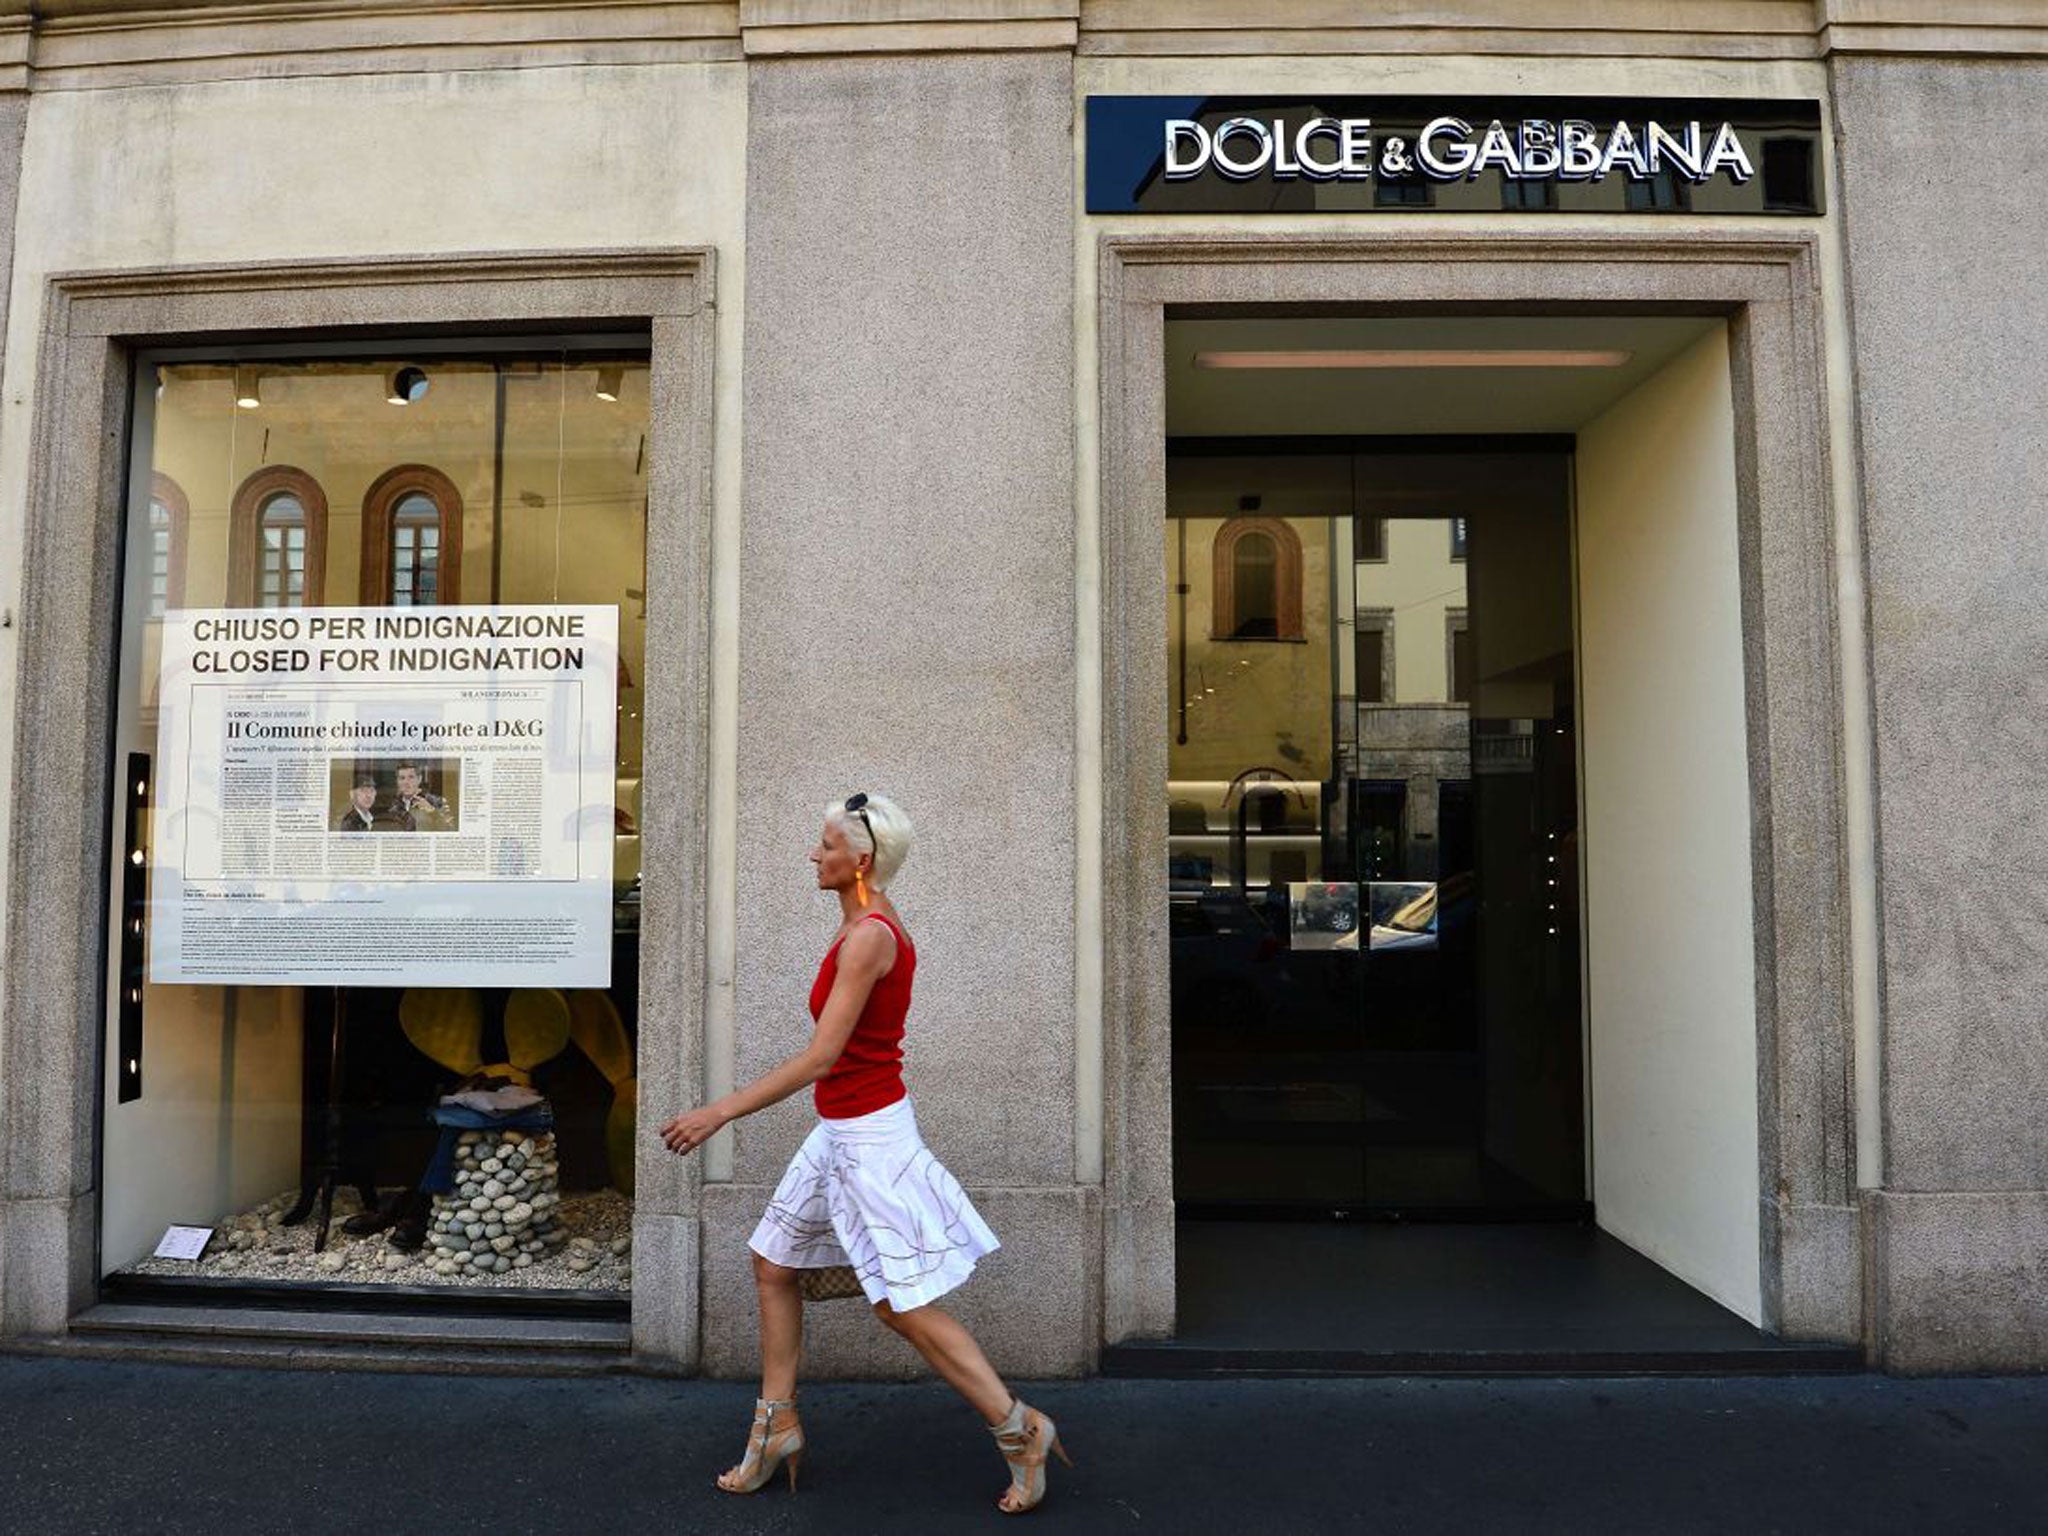 'Closed for Indignation' - a Dolce & Gabbana shop in downtown Milan